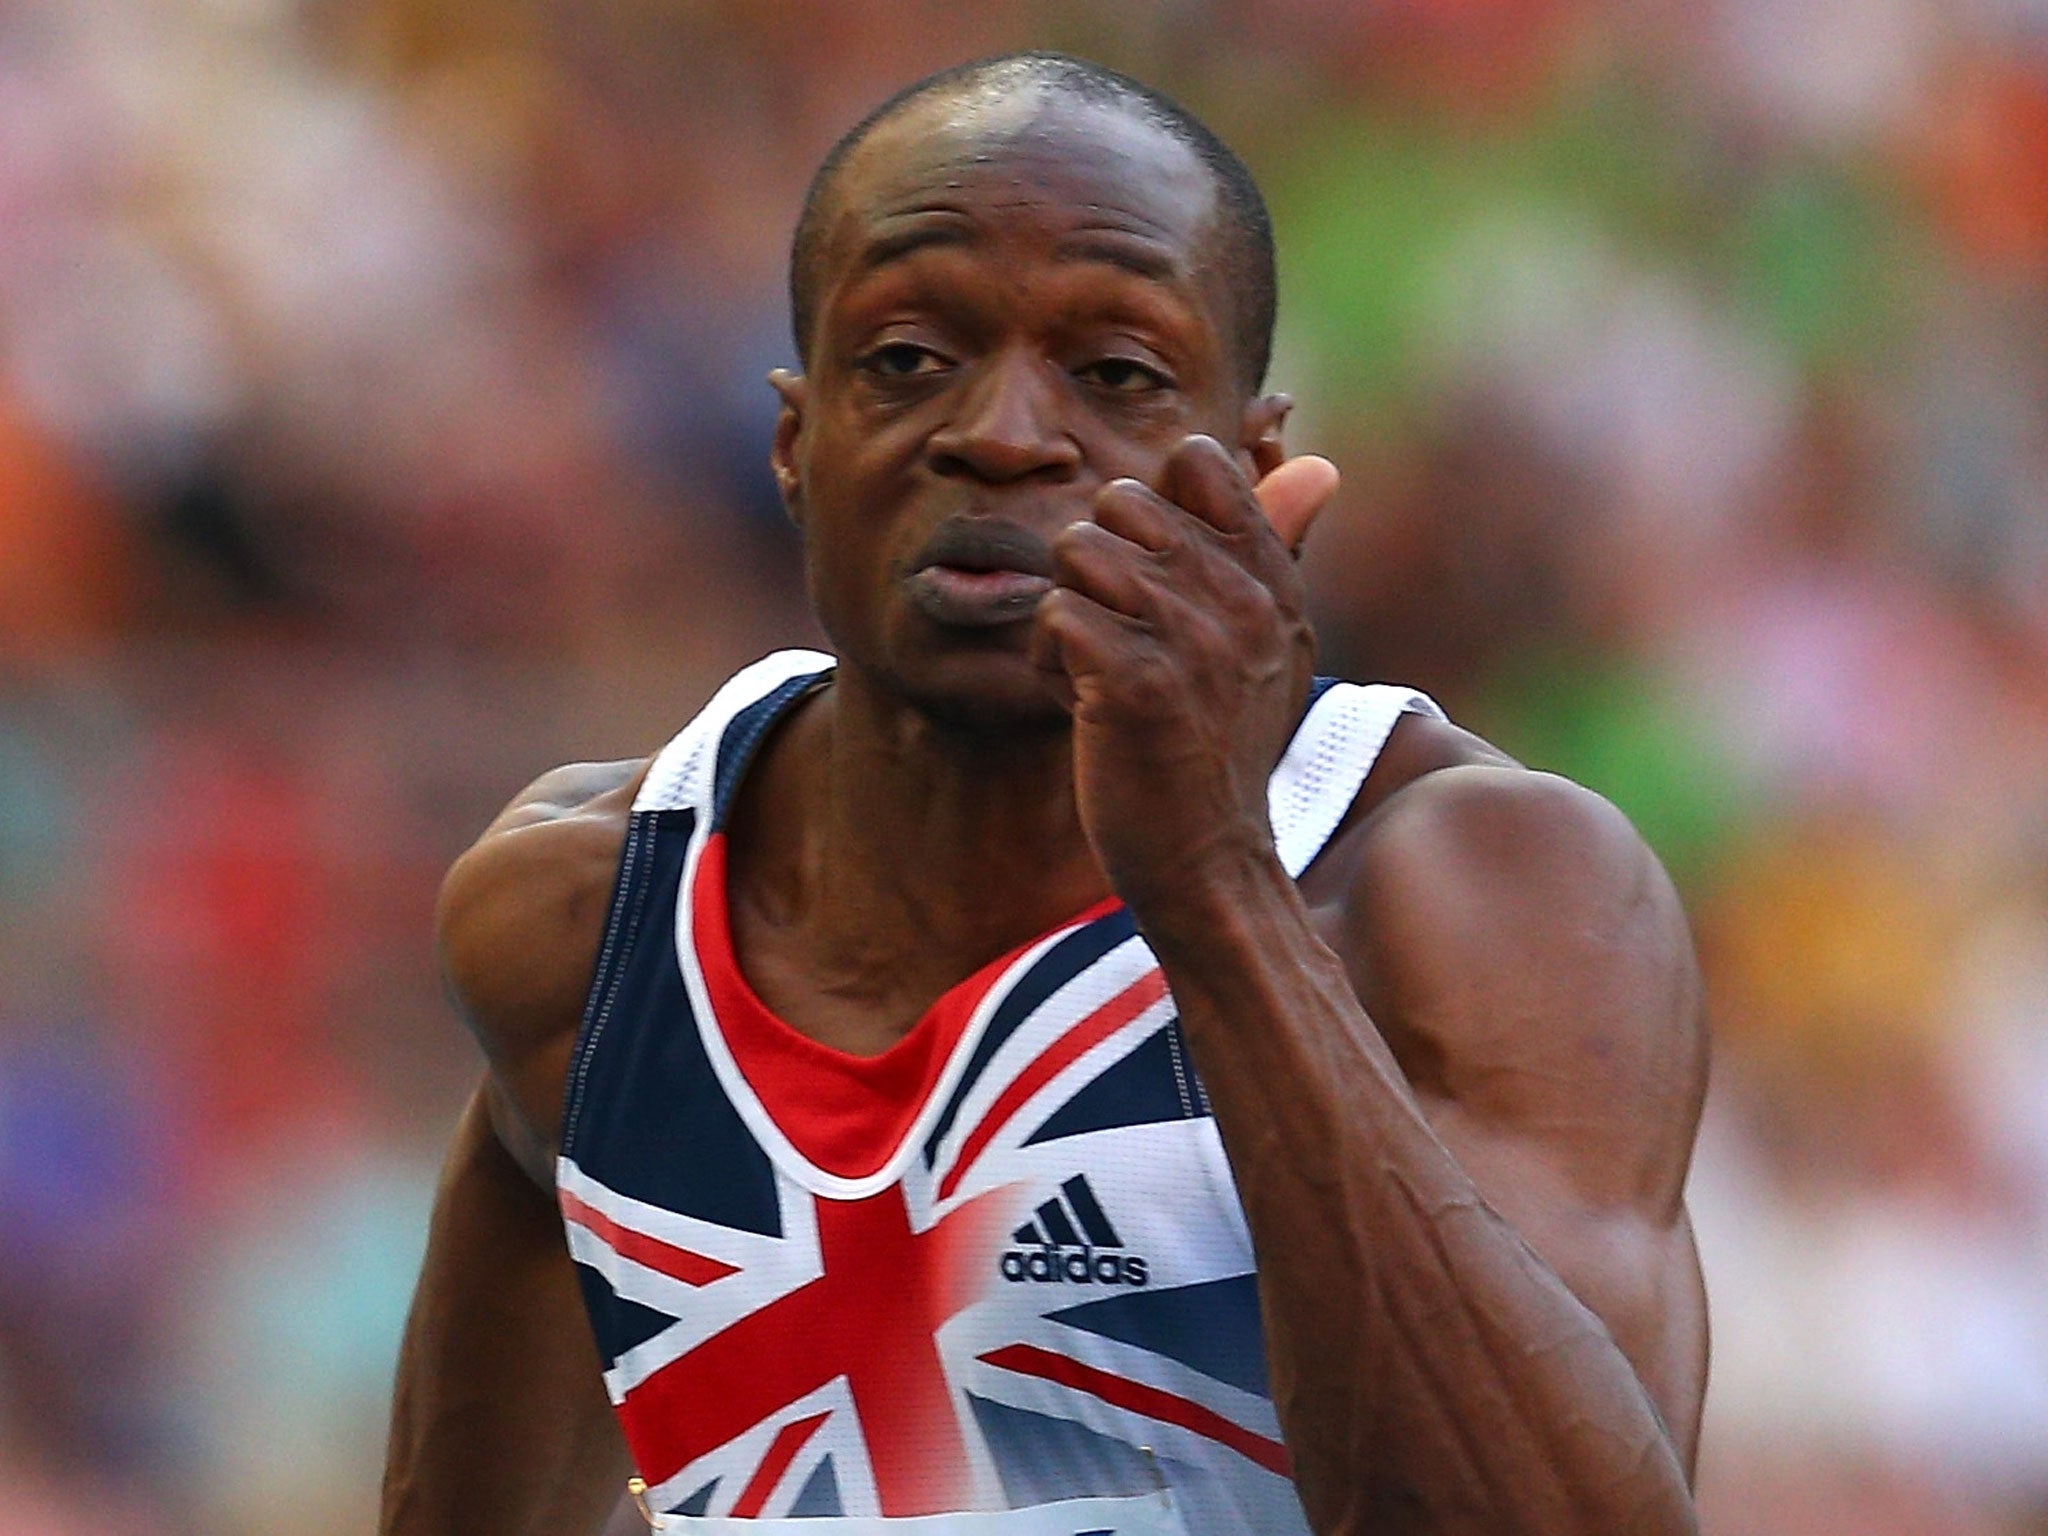 James Dasaolu last year ran the second-fastest 100m time by a British sprinter ever